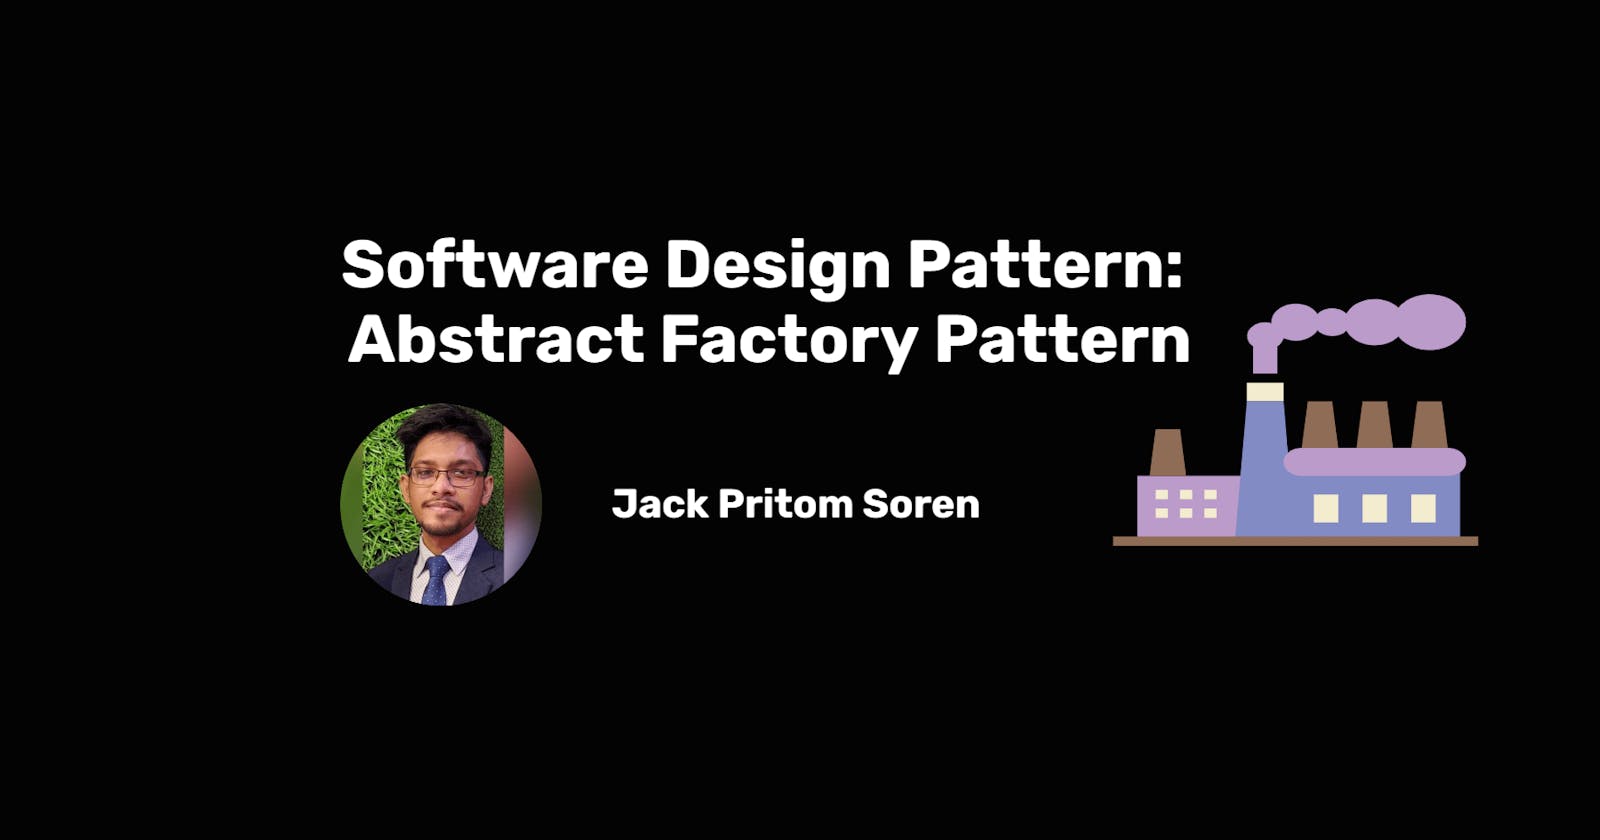 Software Design Pattern: Abstract Factory Pattern